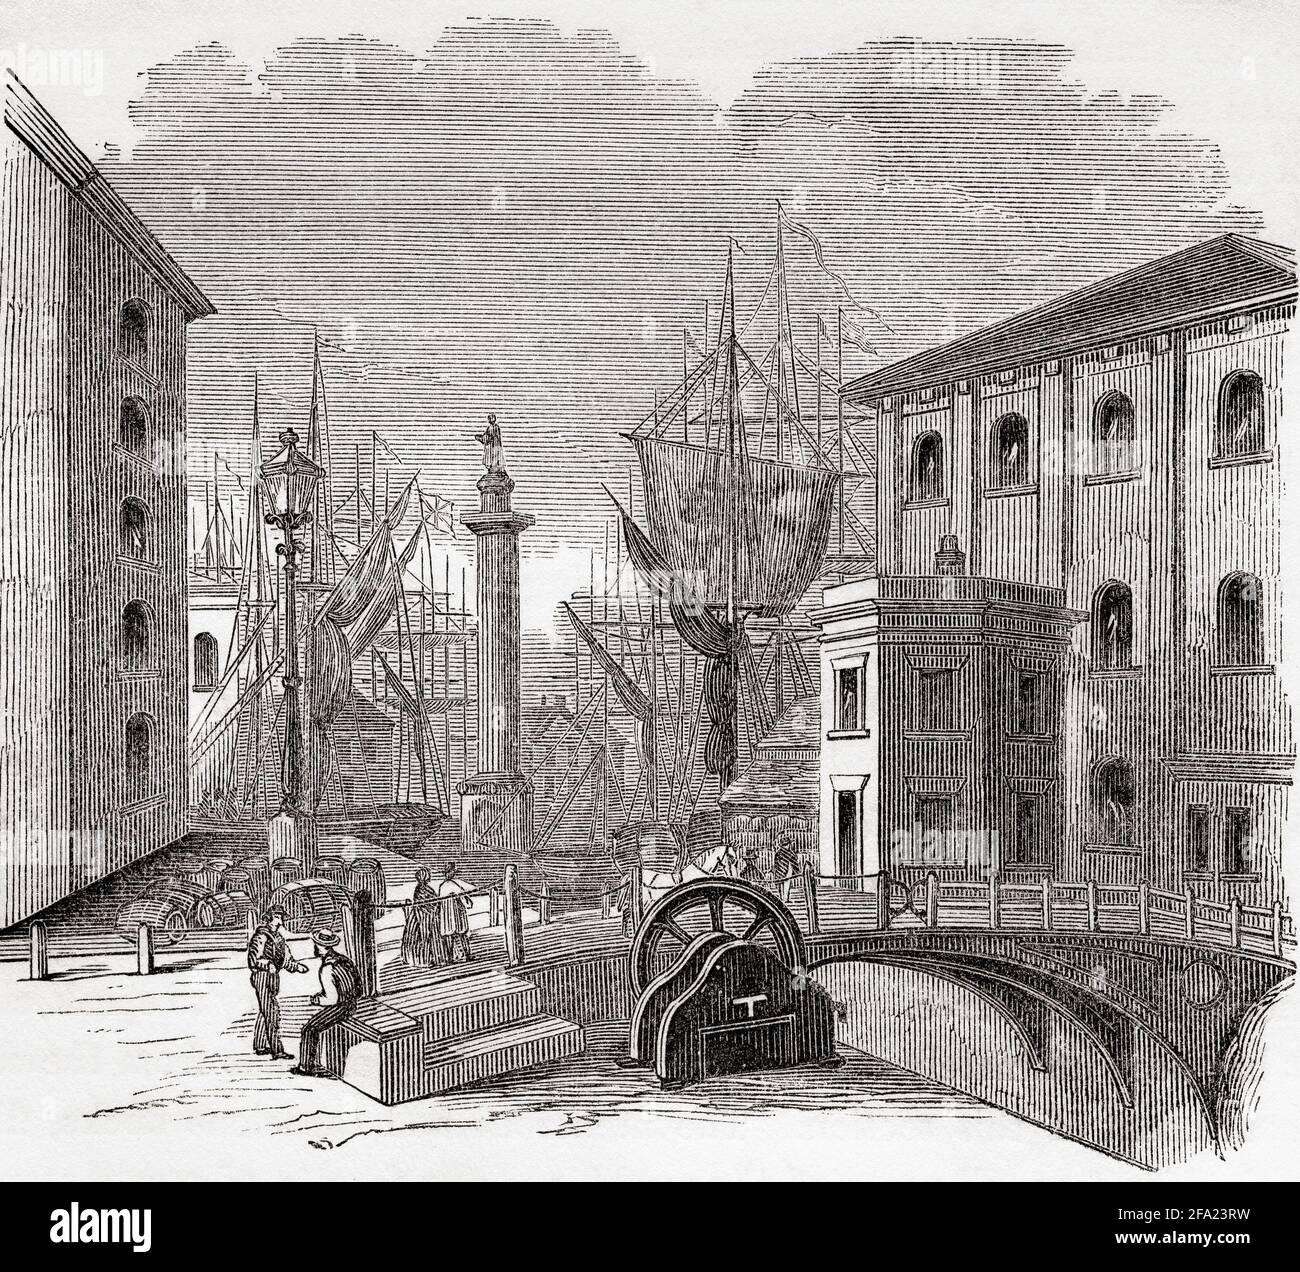 The docks at Hull,  Kingston upon Hull, East Riding of Yorkshire, England, seen here in the 19th century.   From The History of Progress in Great Britain, published 1866. Stock Photo